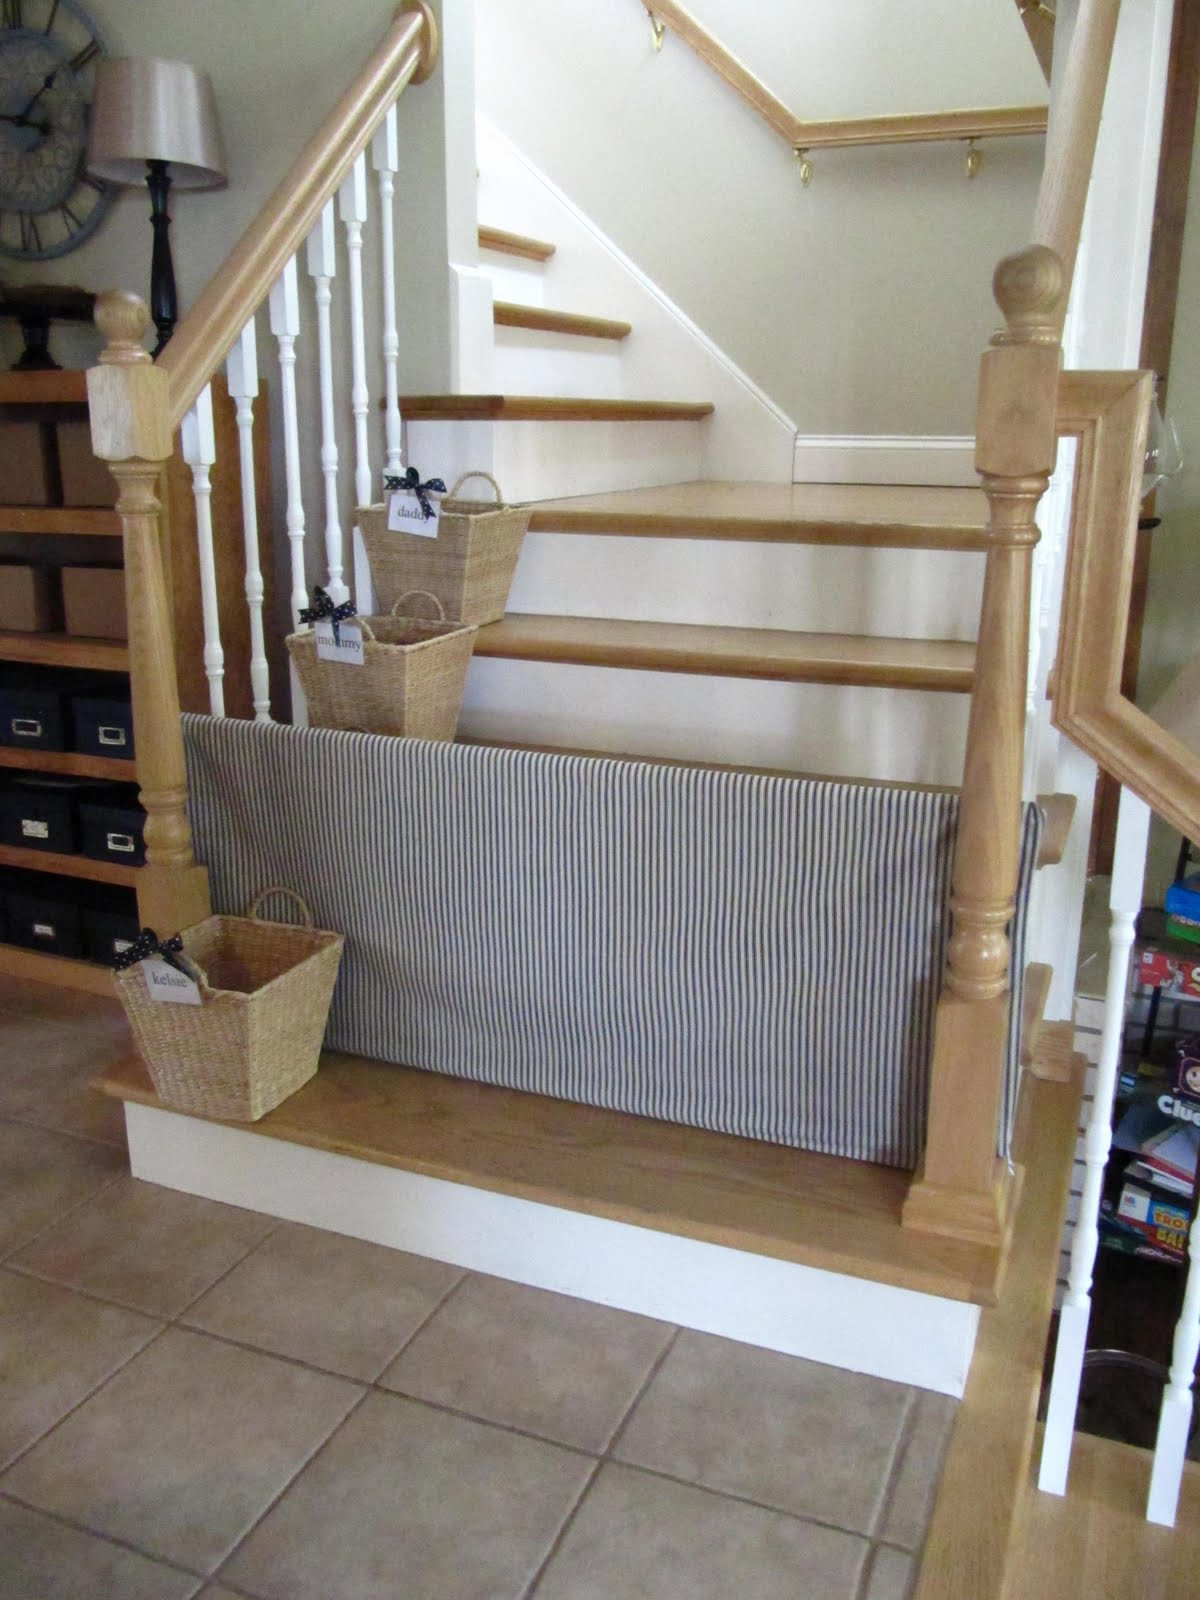 DIY Baby Gate For Stairs
 10 DIY Baby Gates for Stairs